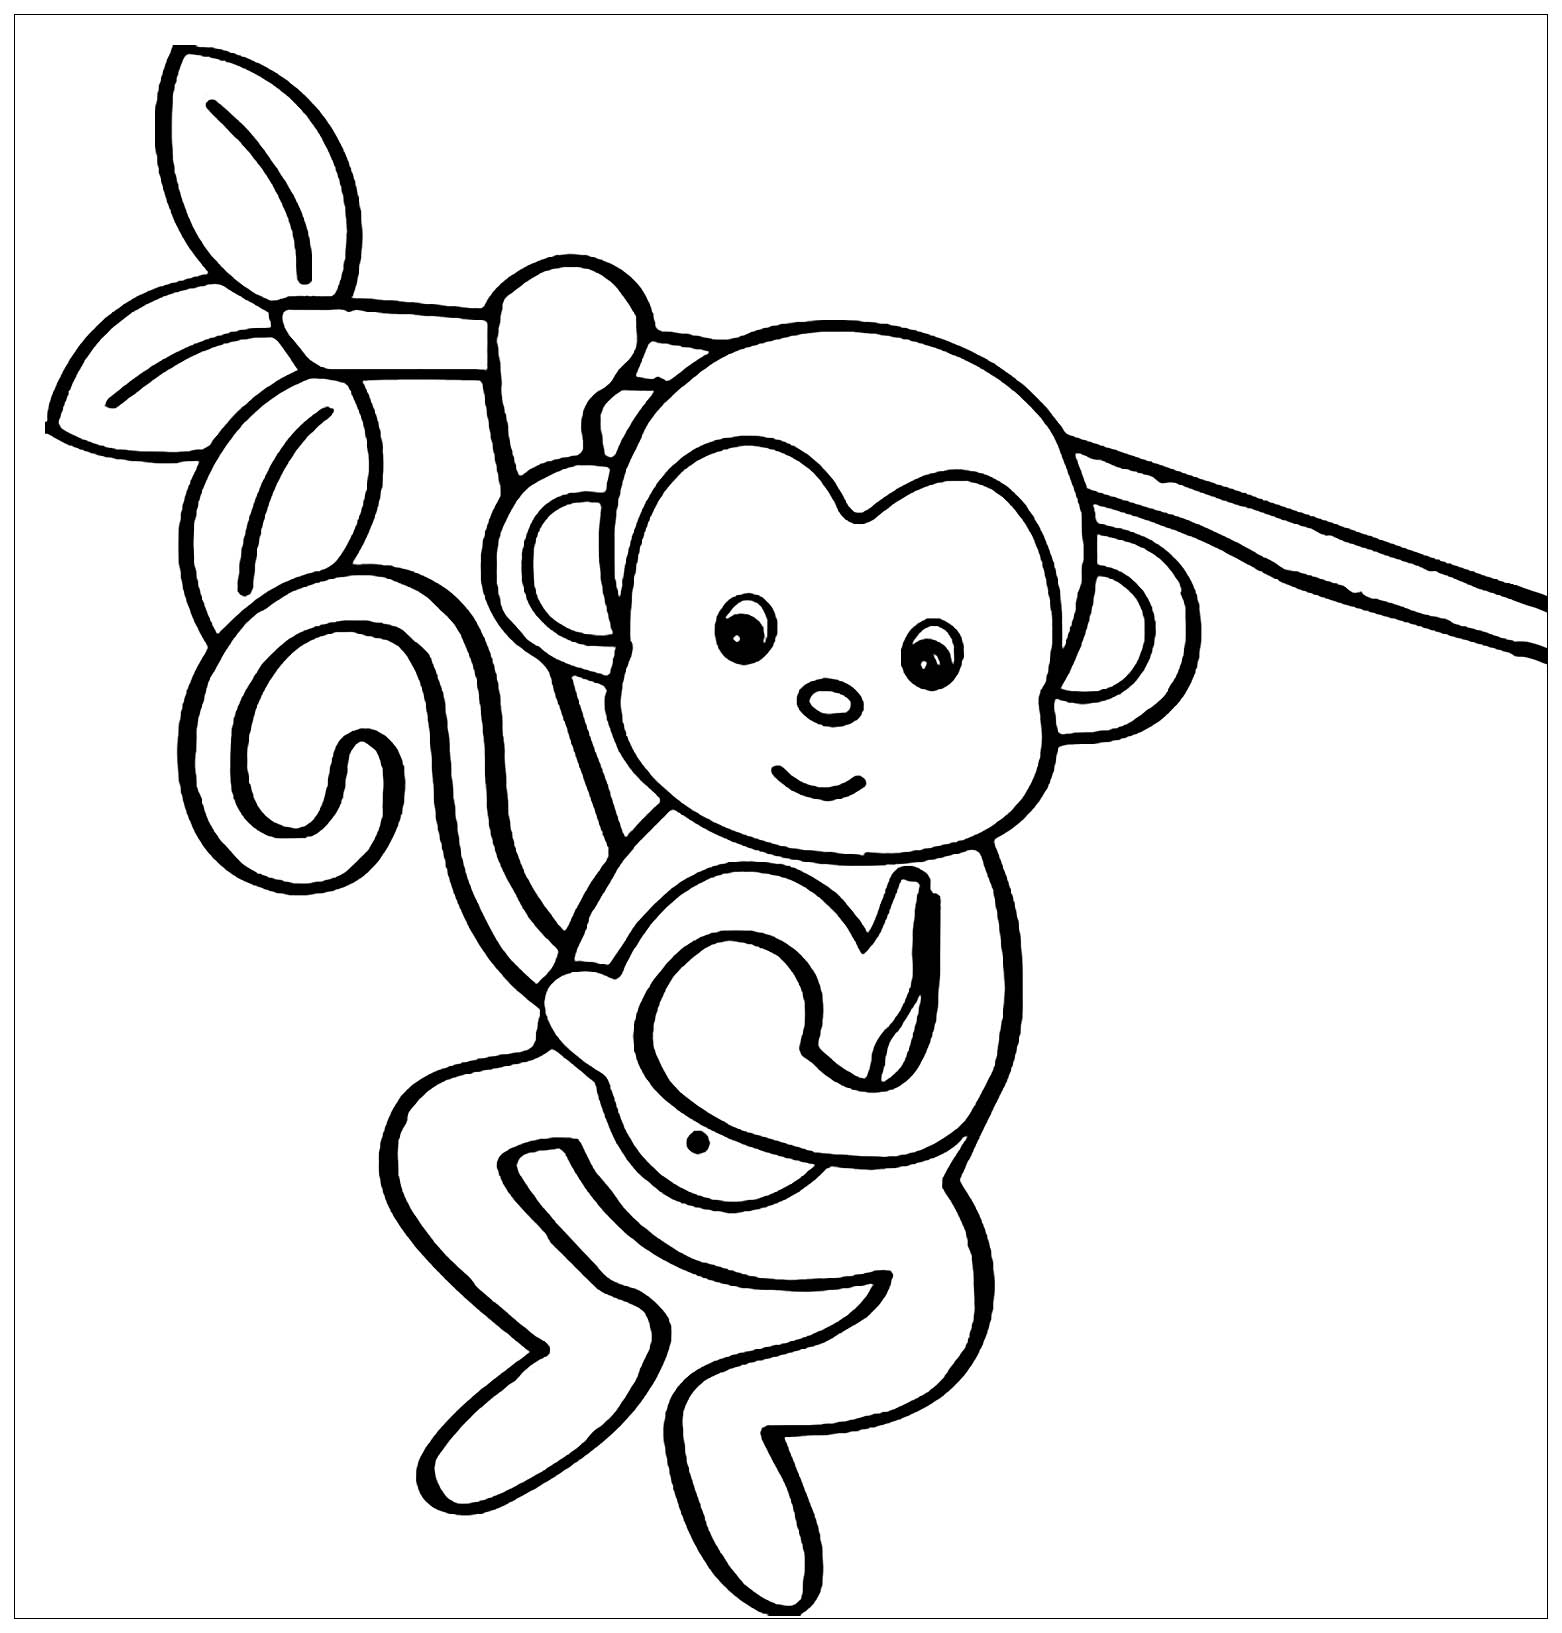 pictures of monkeys to color baby monkey coloring pages to download and print for free to of pictures monkeys color